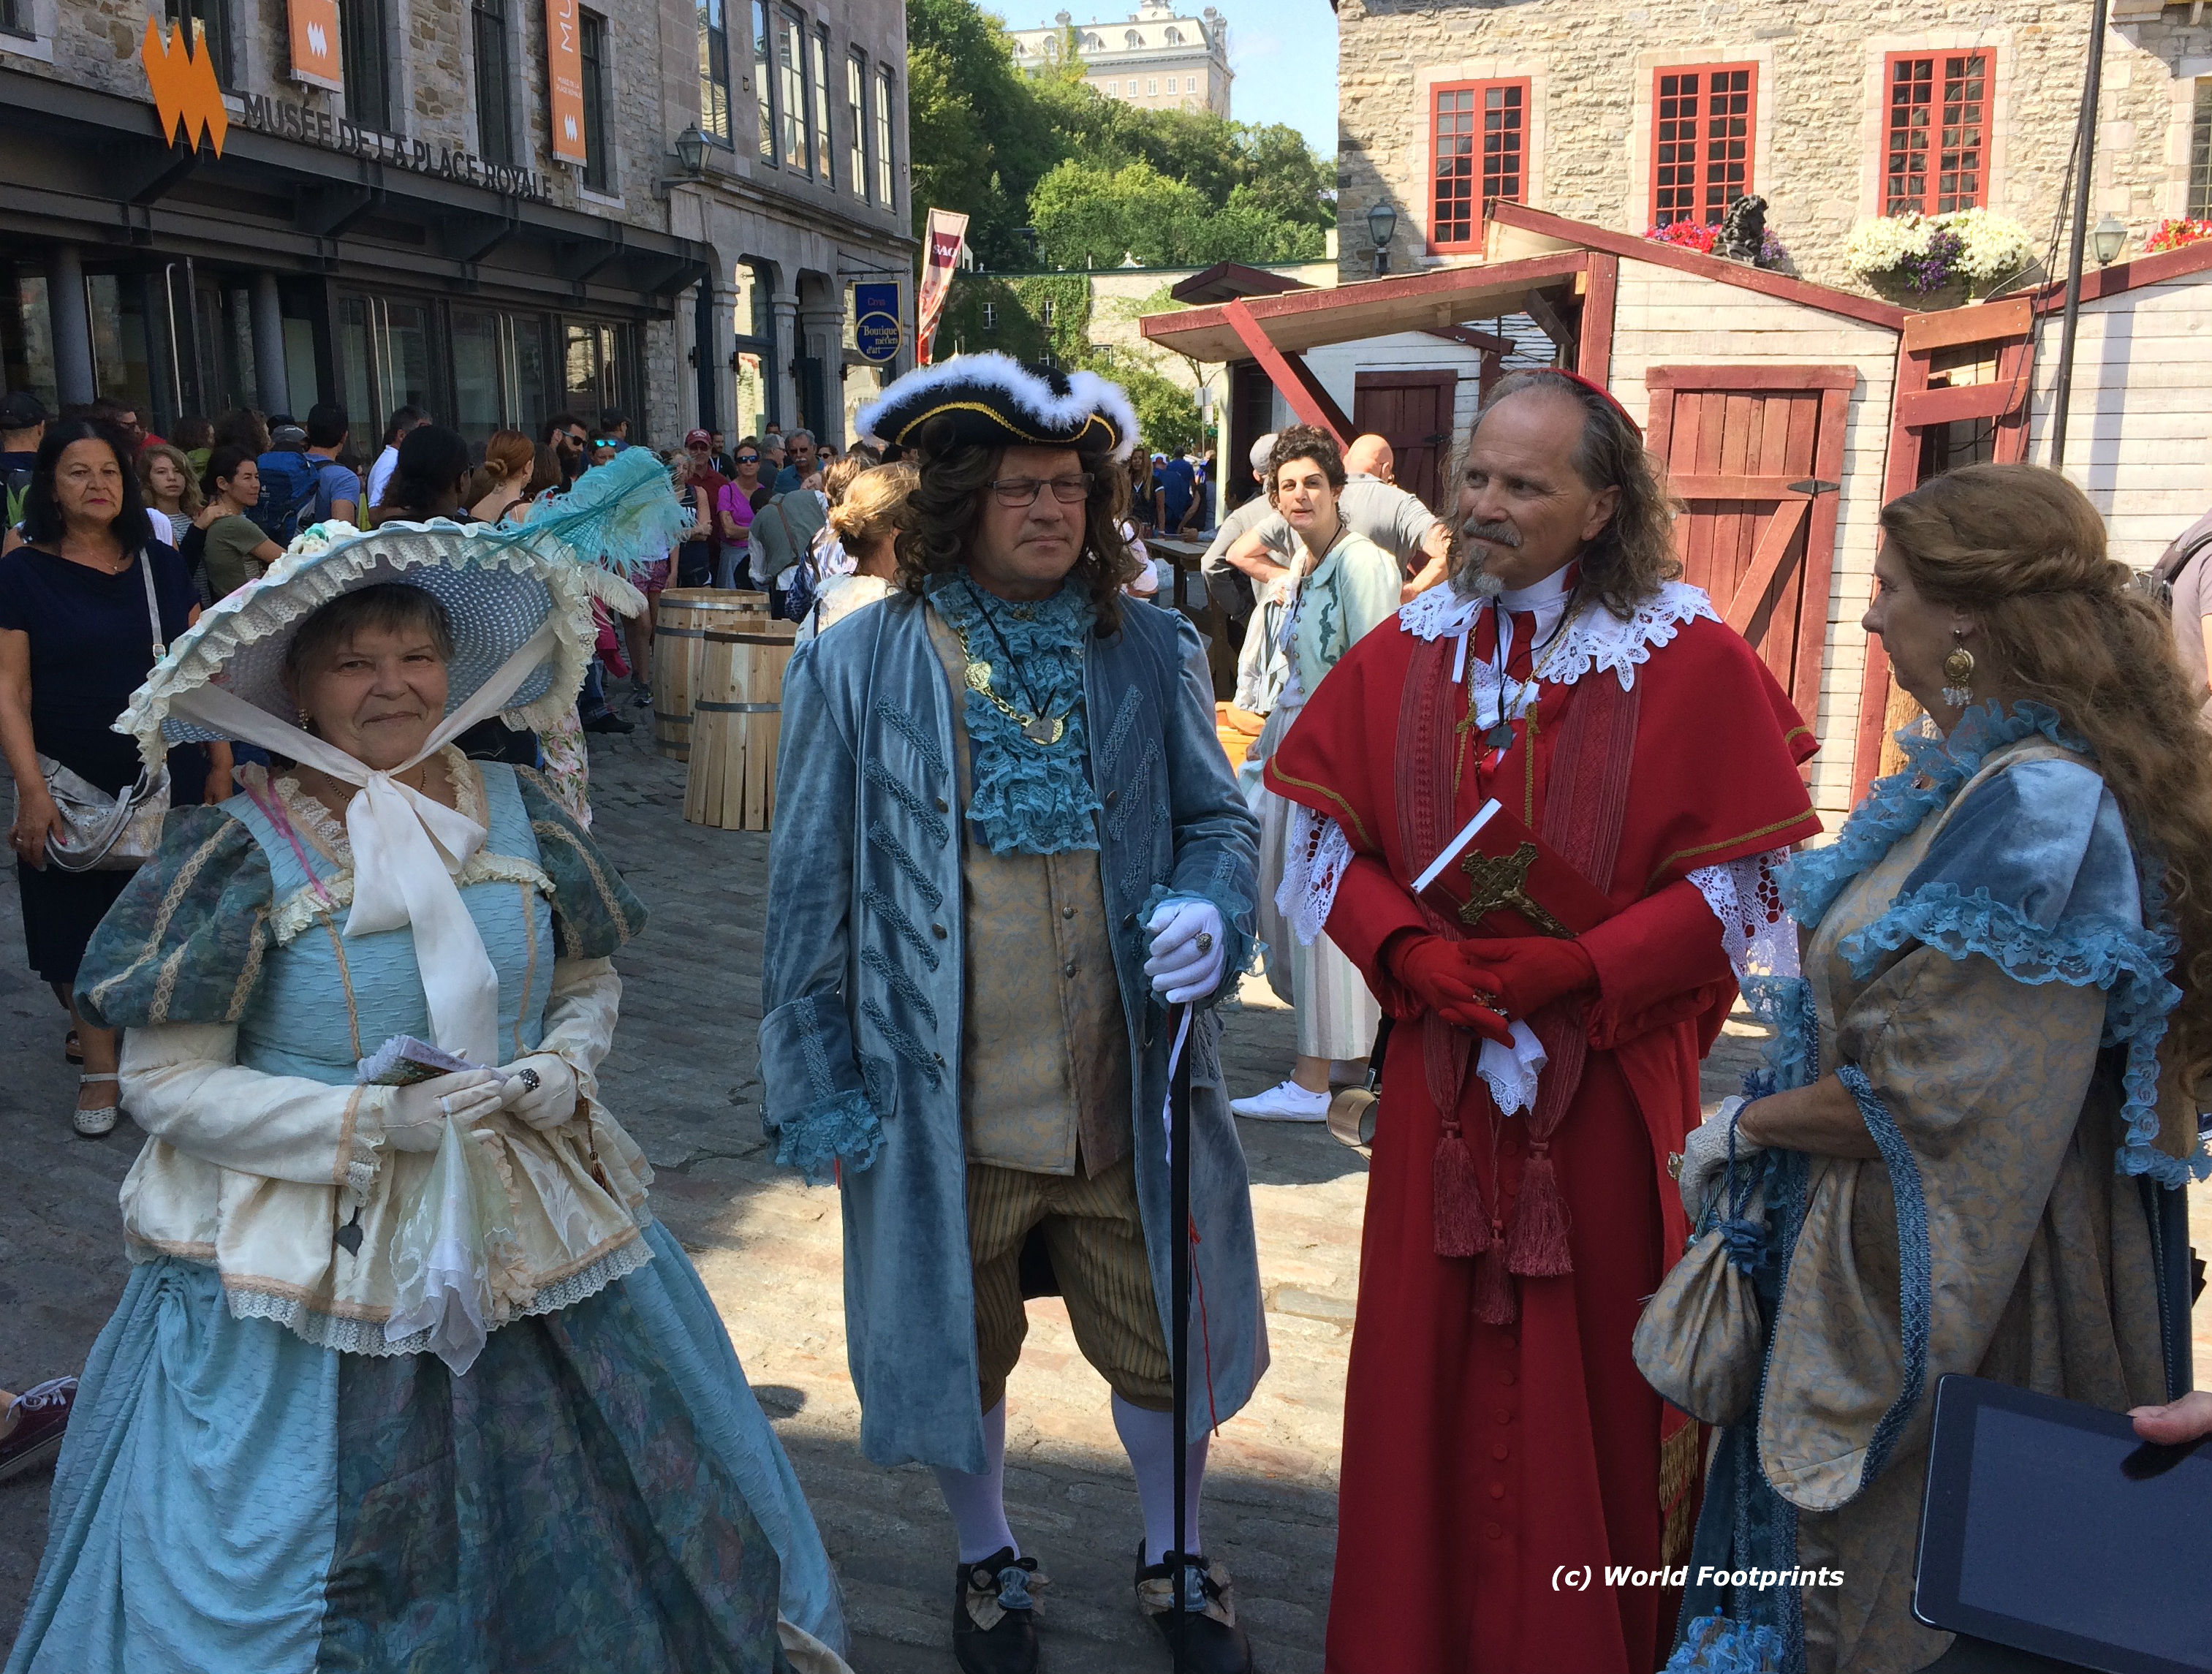 New France festivalgoers dressed in period costumes